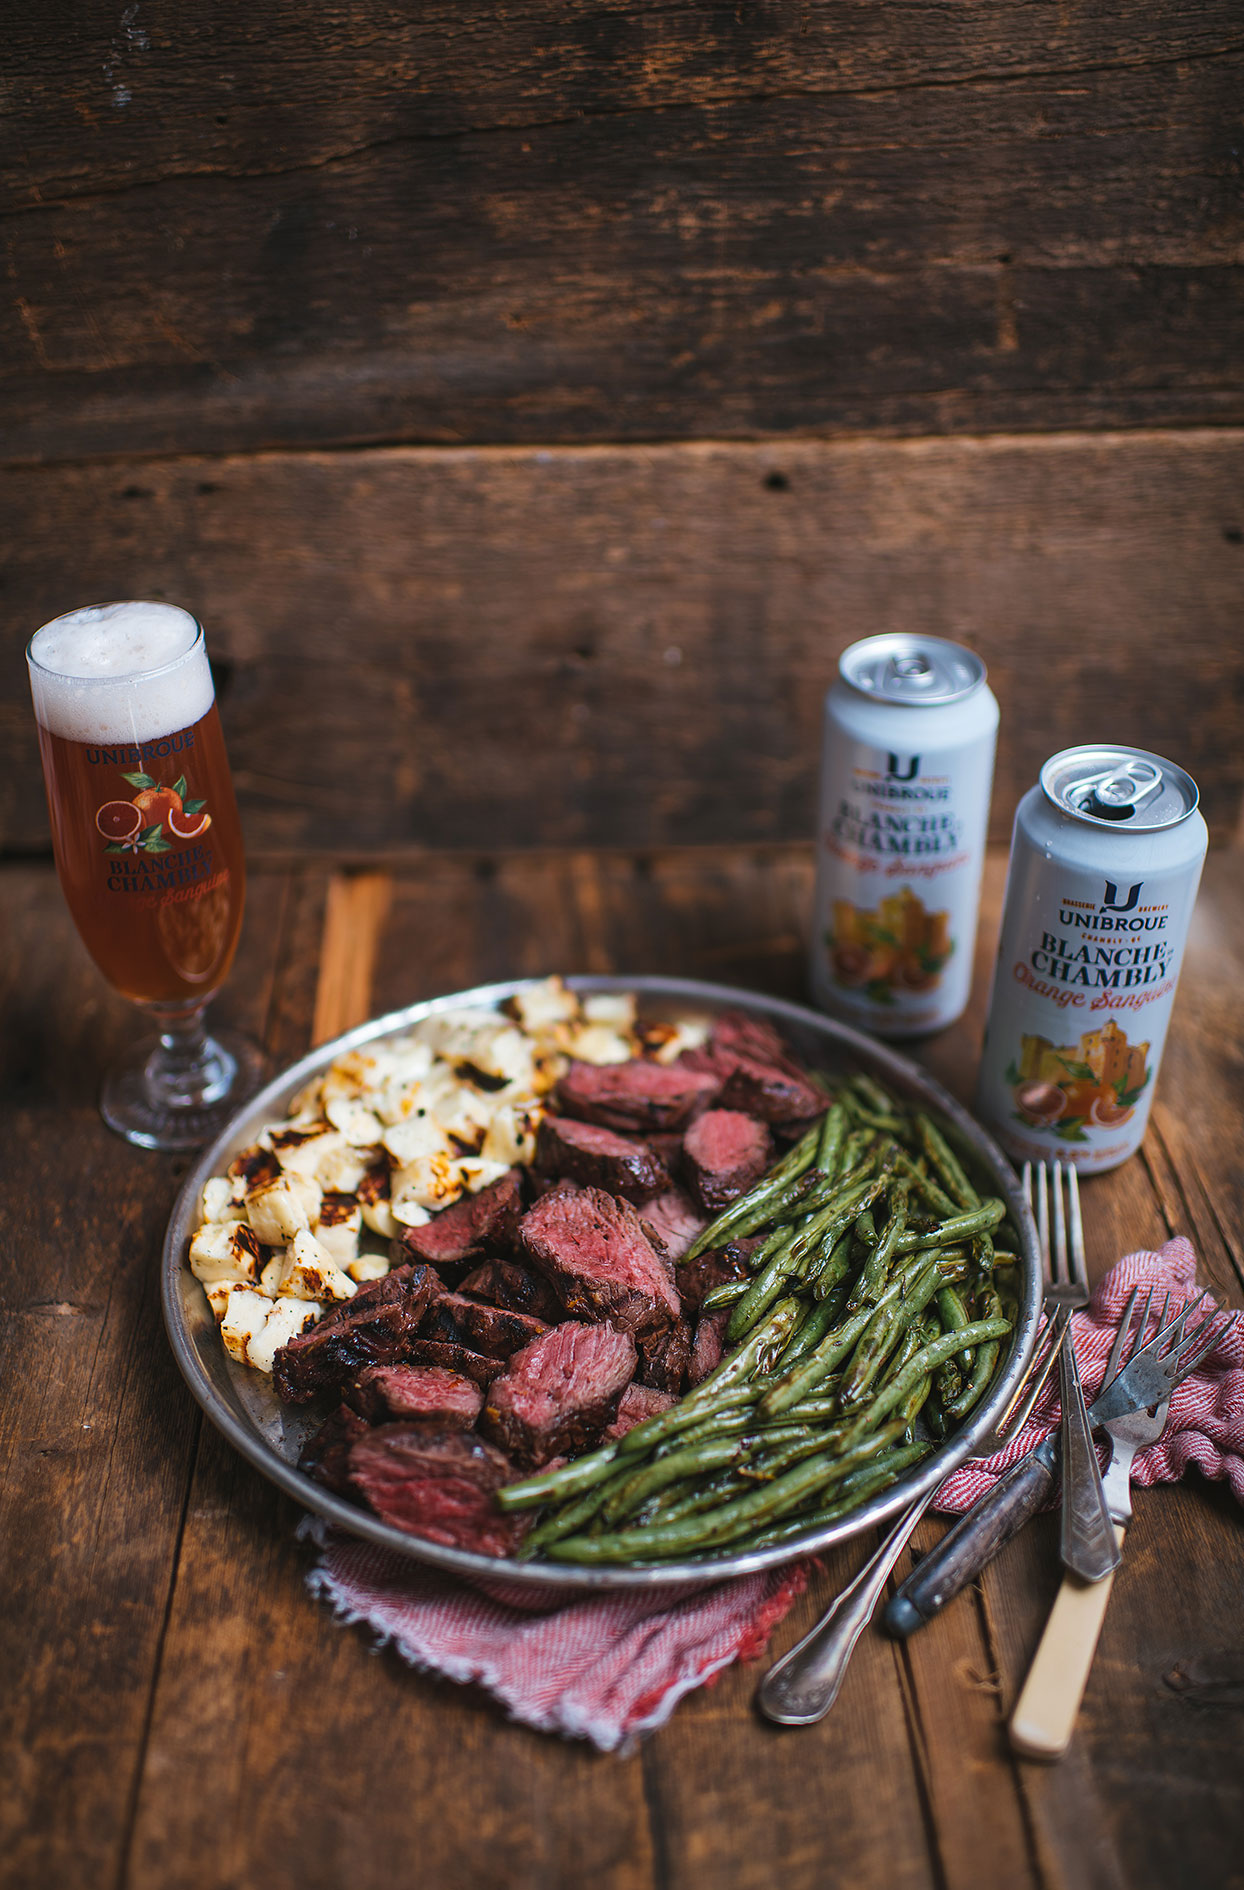 Asian style grilled beef hanger steak with Blanche de Chambly Orange Sanguine beer